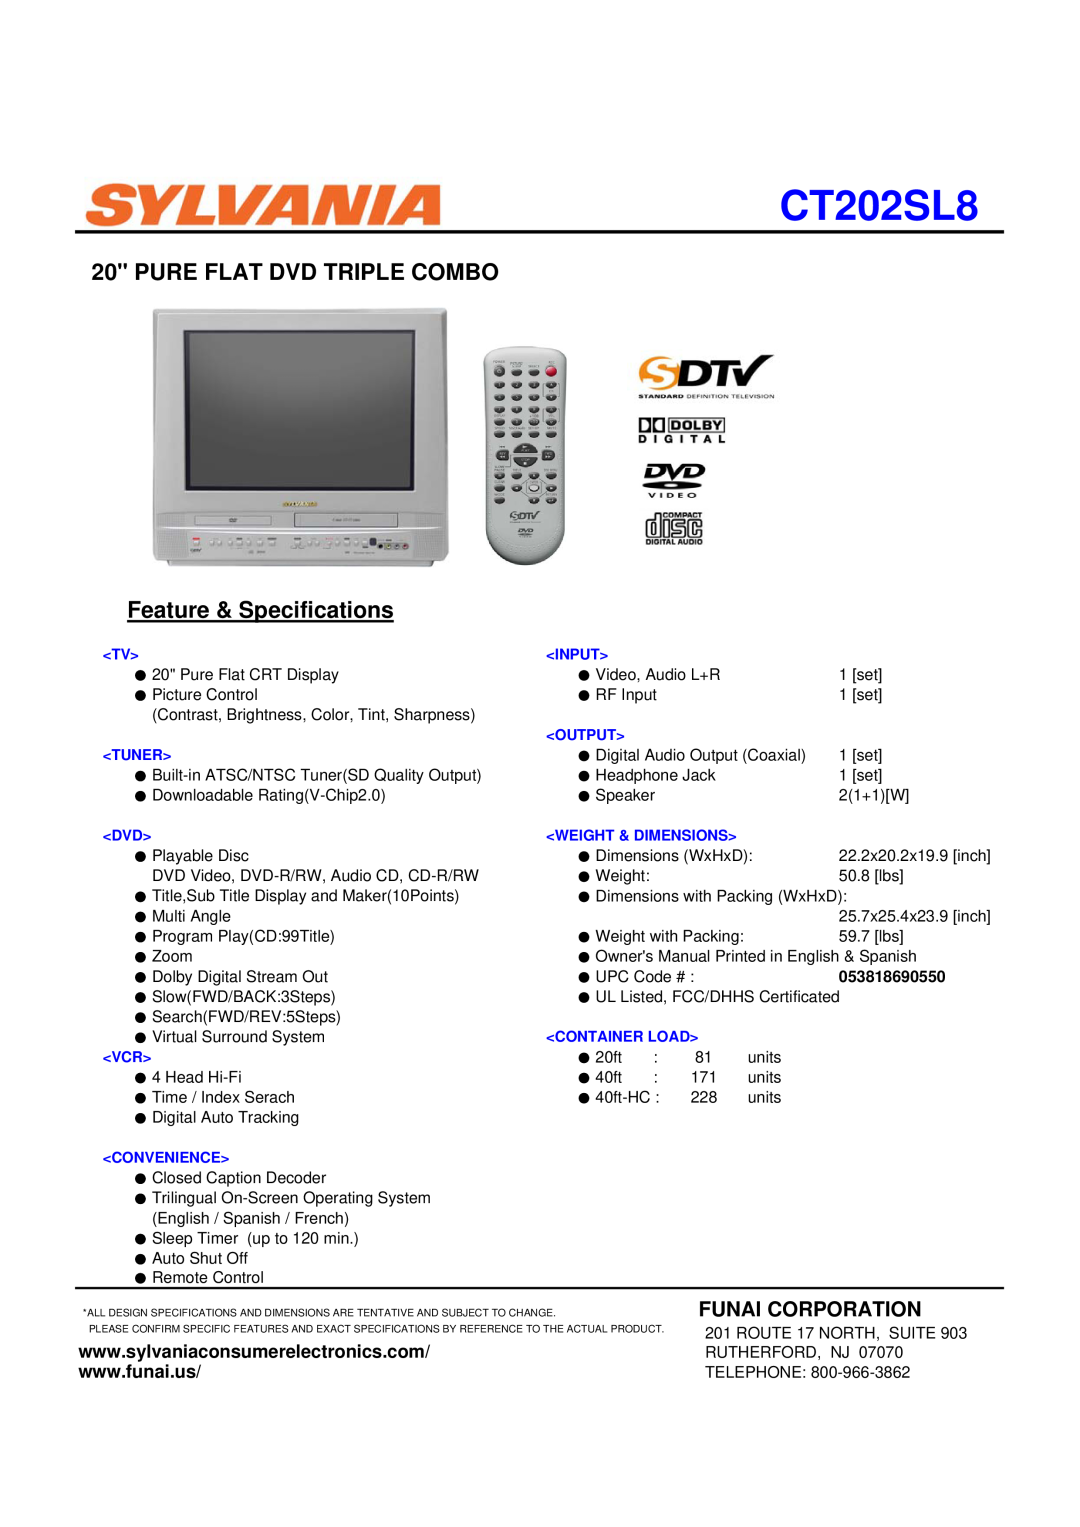 Sylvania CT202SL8 specifications PURE FLAT DVD TRIPLE COMBO Feature & Specifications, Funai Corporation, 053818690550 